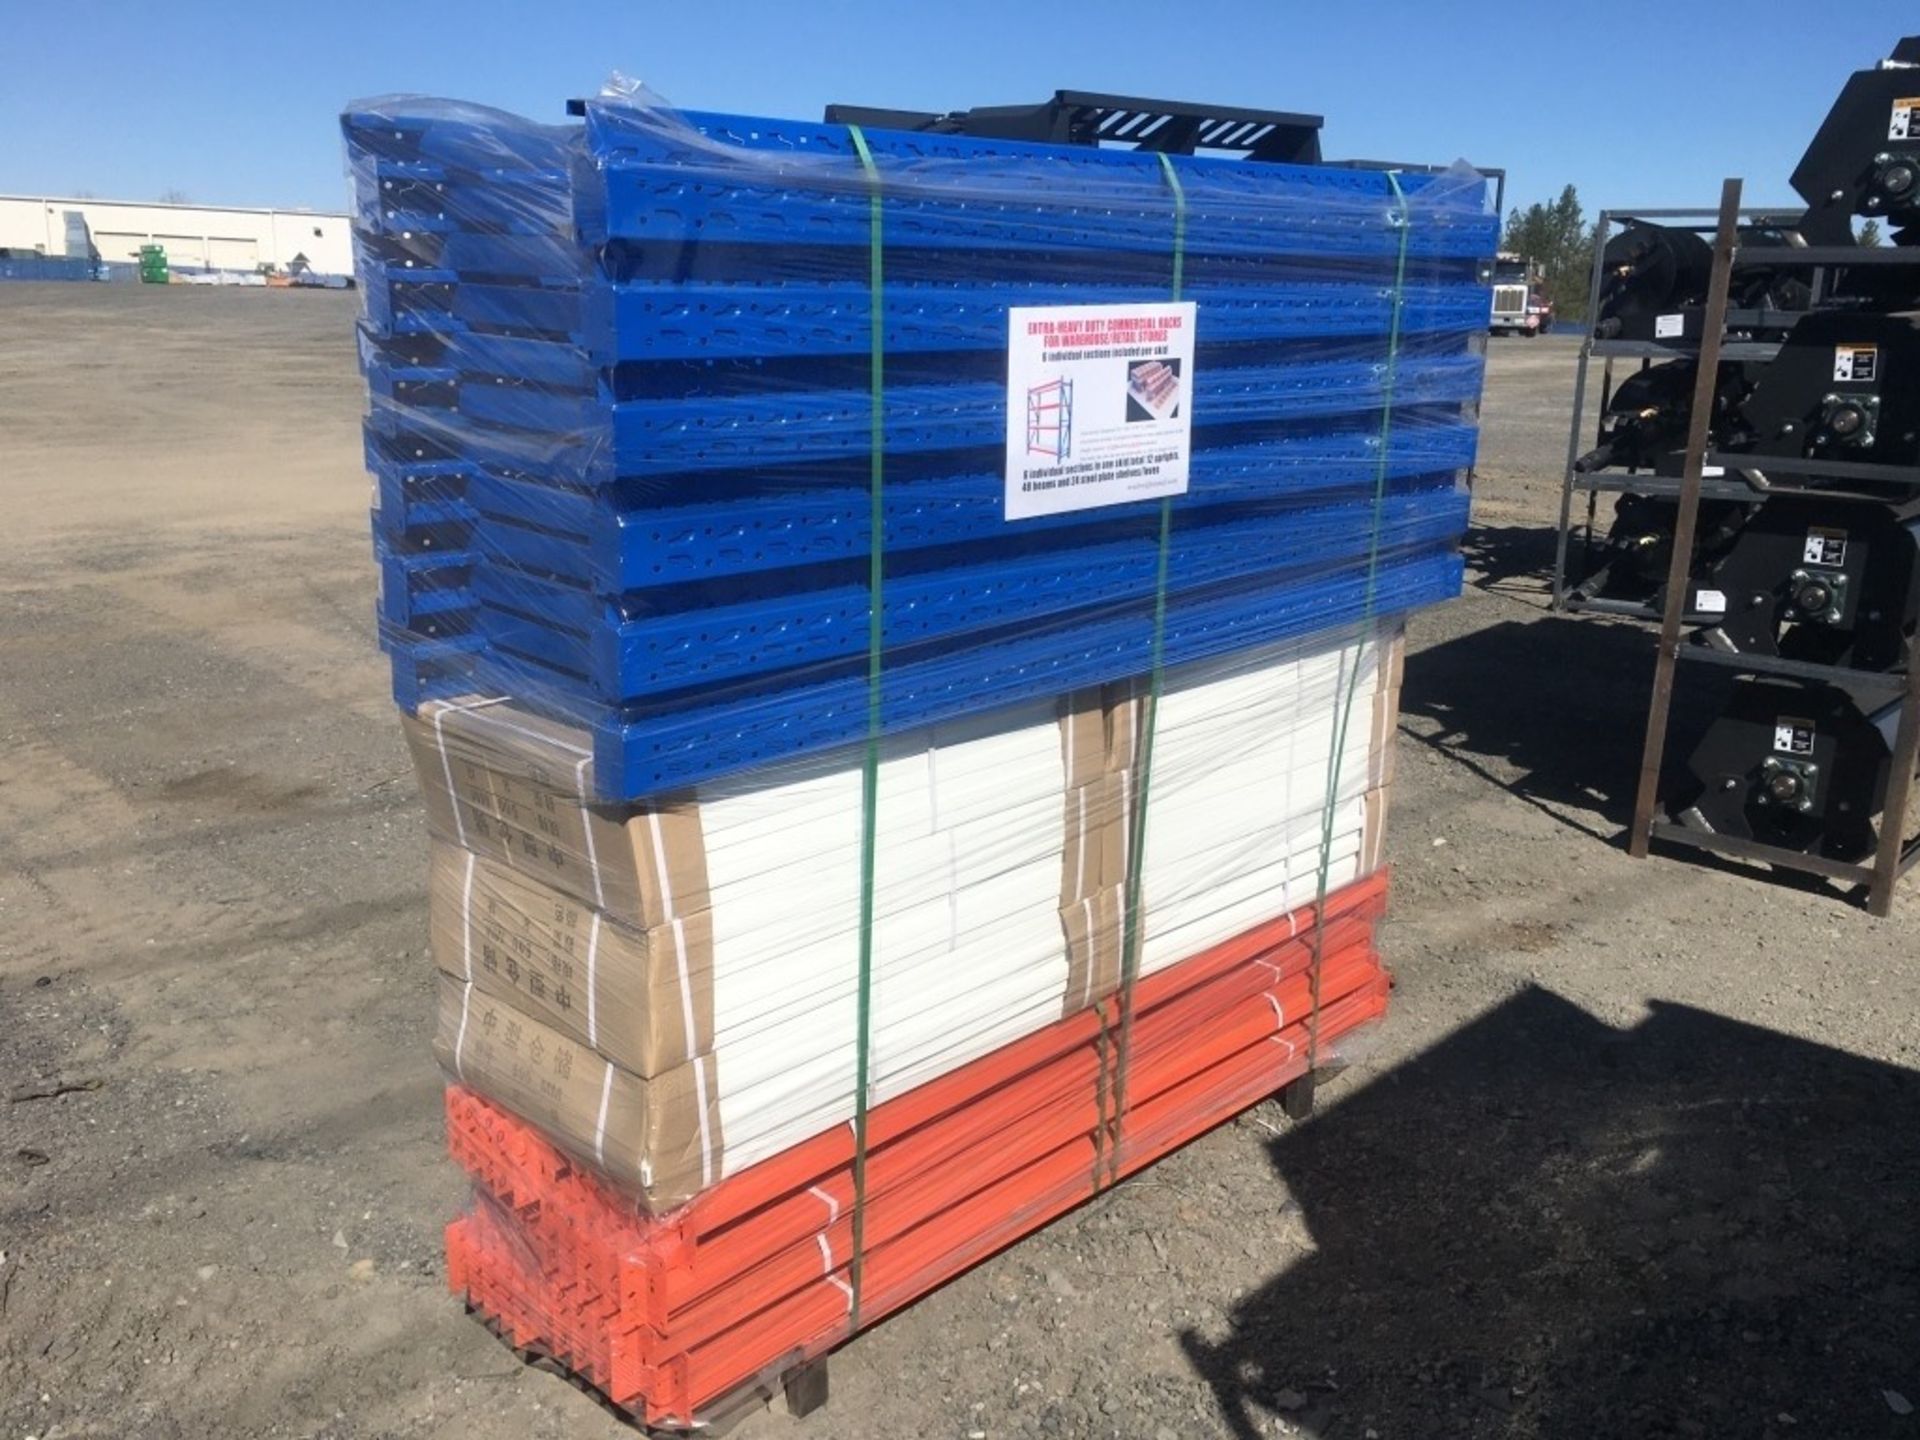 2020 Commercial Heavy Duty Pallet Racking - Image 2 of 3